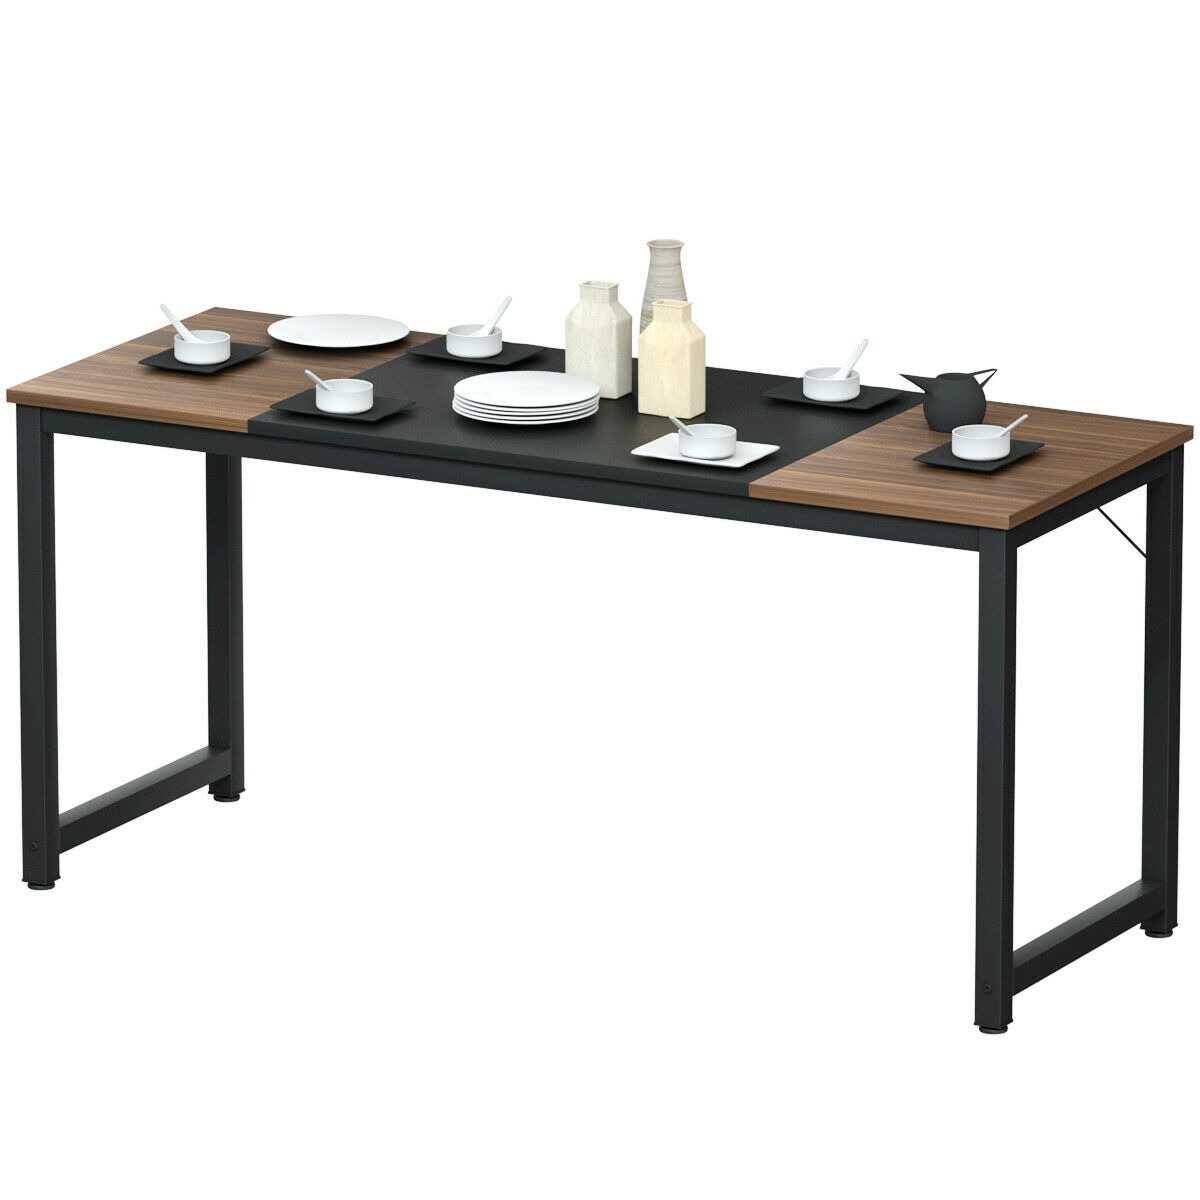 63'' Dining Table Rectangular Two-Tone Kitchen Table For 6 People W/ Metal Frame